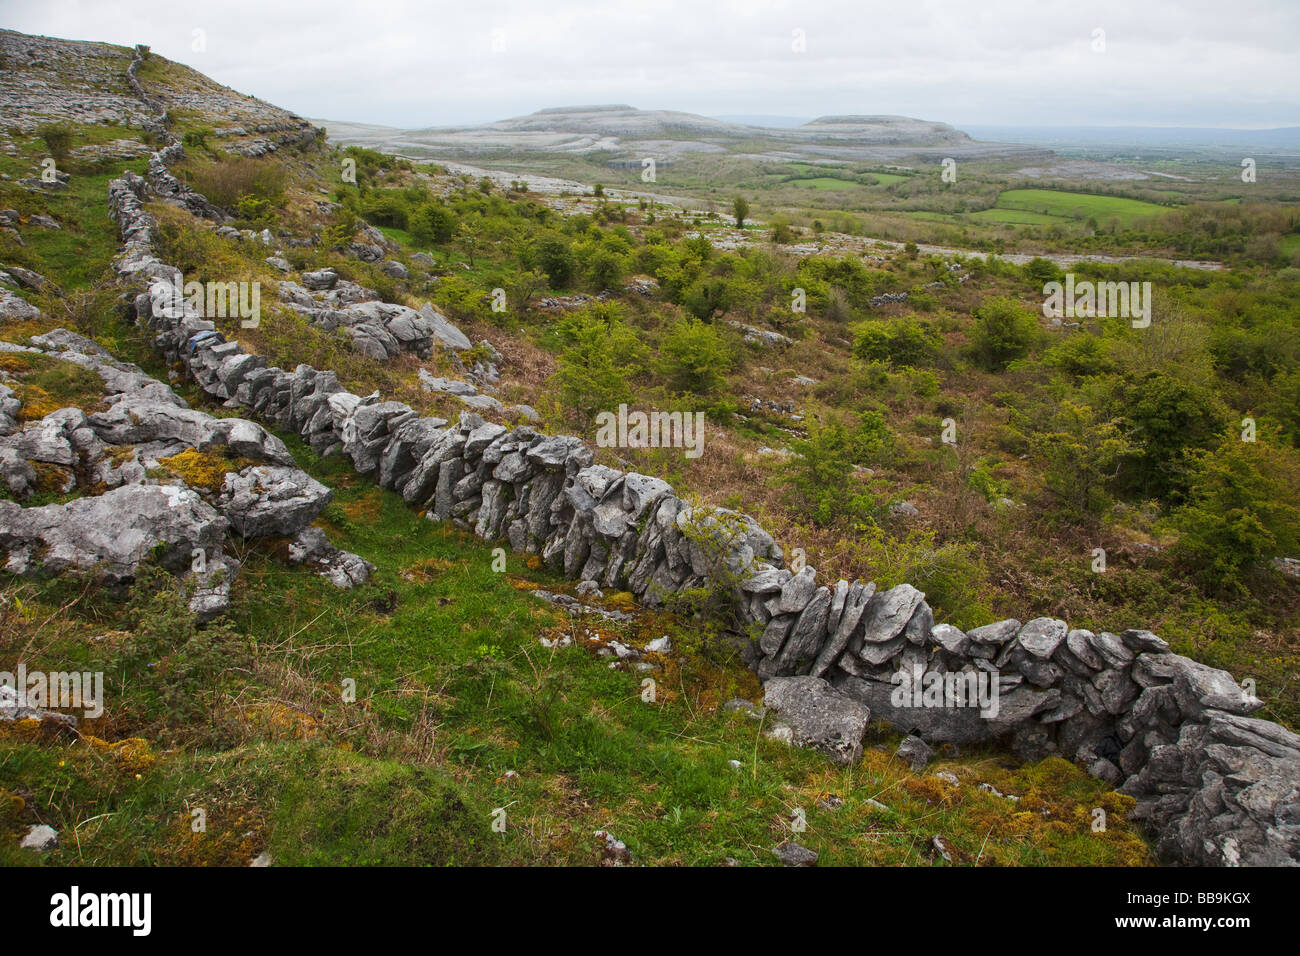 Limestone pavements and stone walls of Fahee North looking to Turloughmore Burren County Clare Ireland Eire Irish Republic Europ Stock Photo